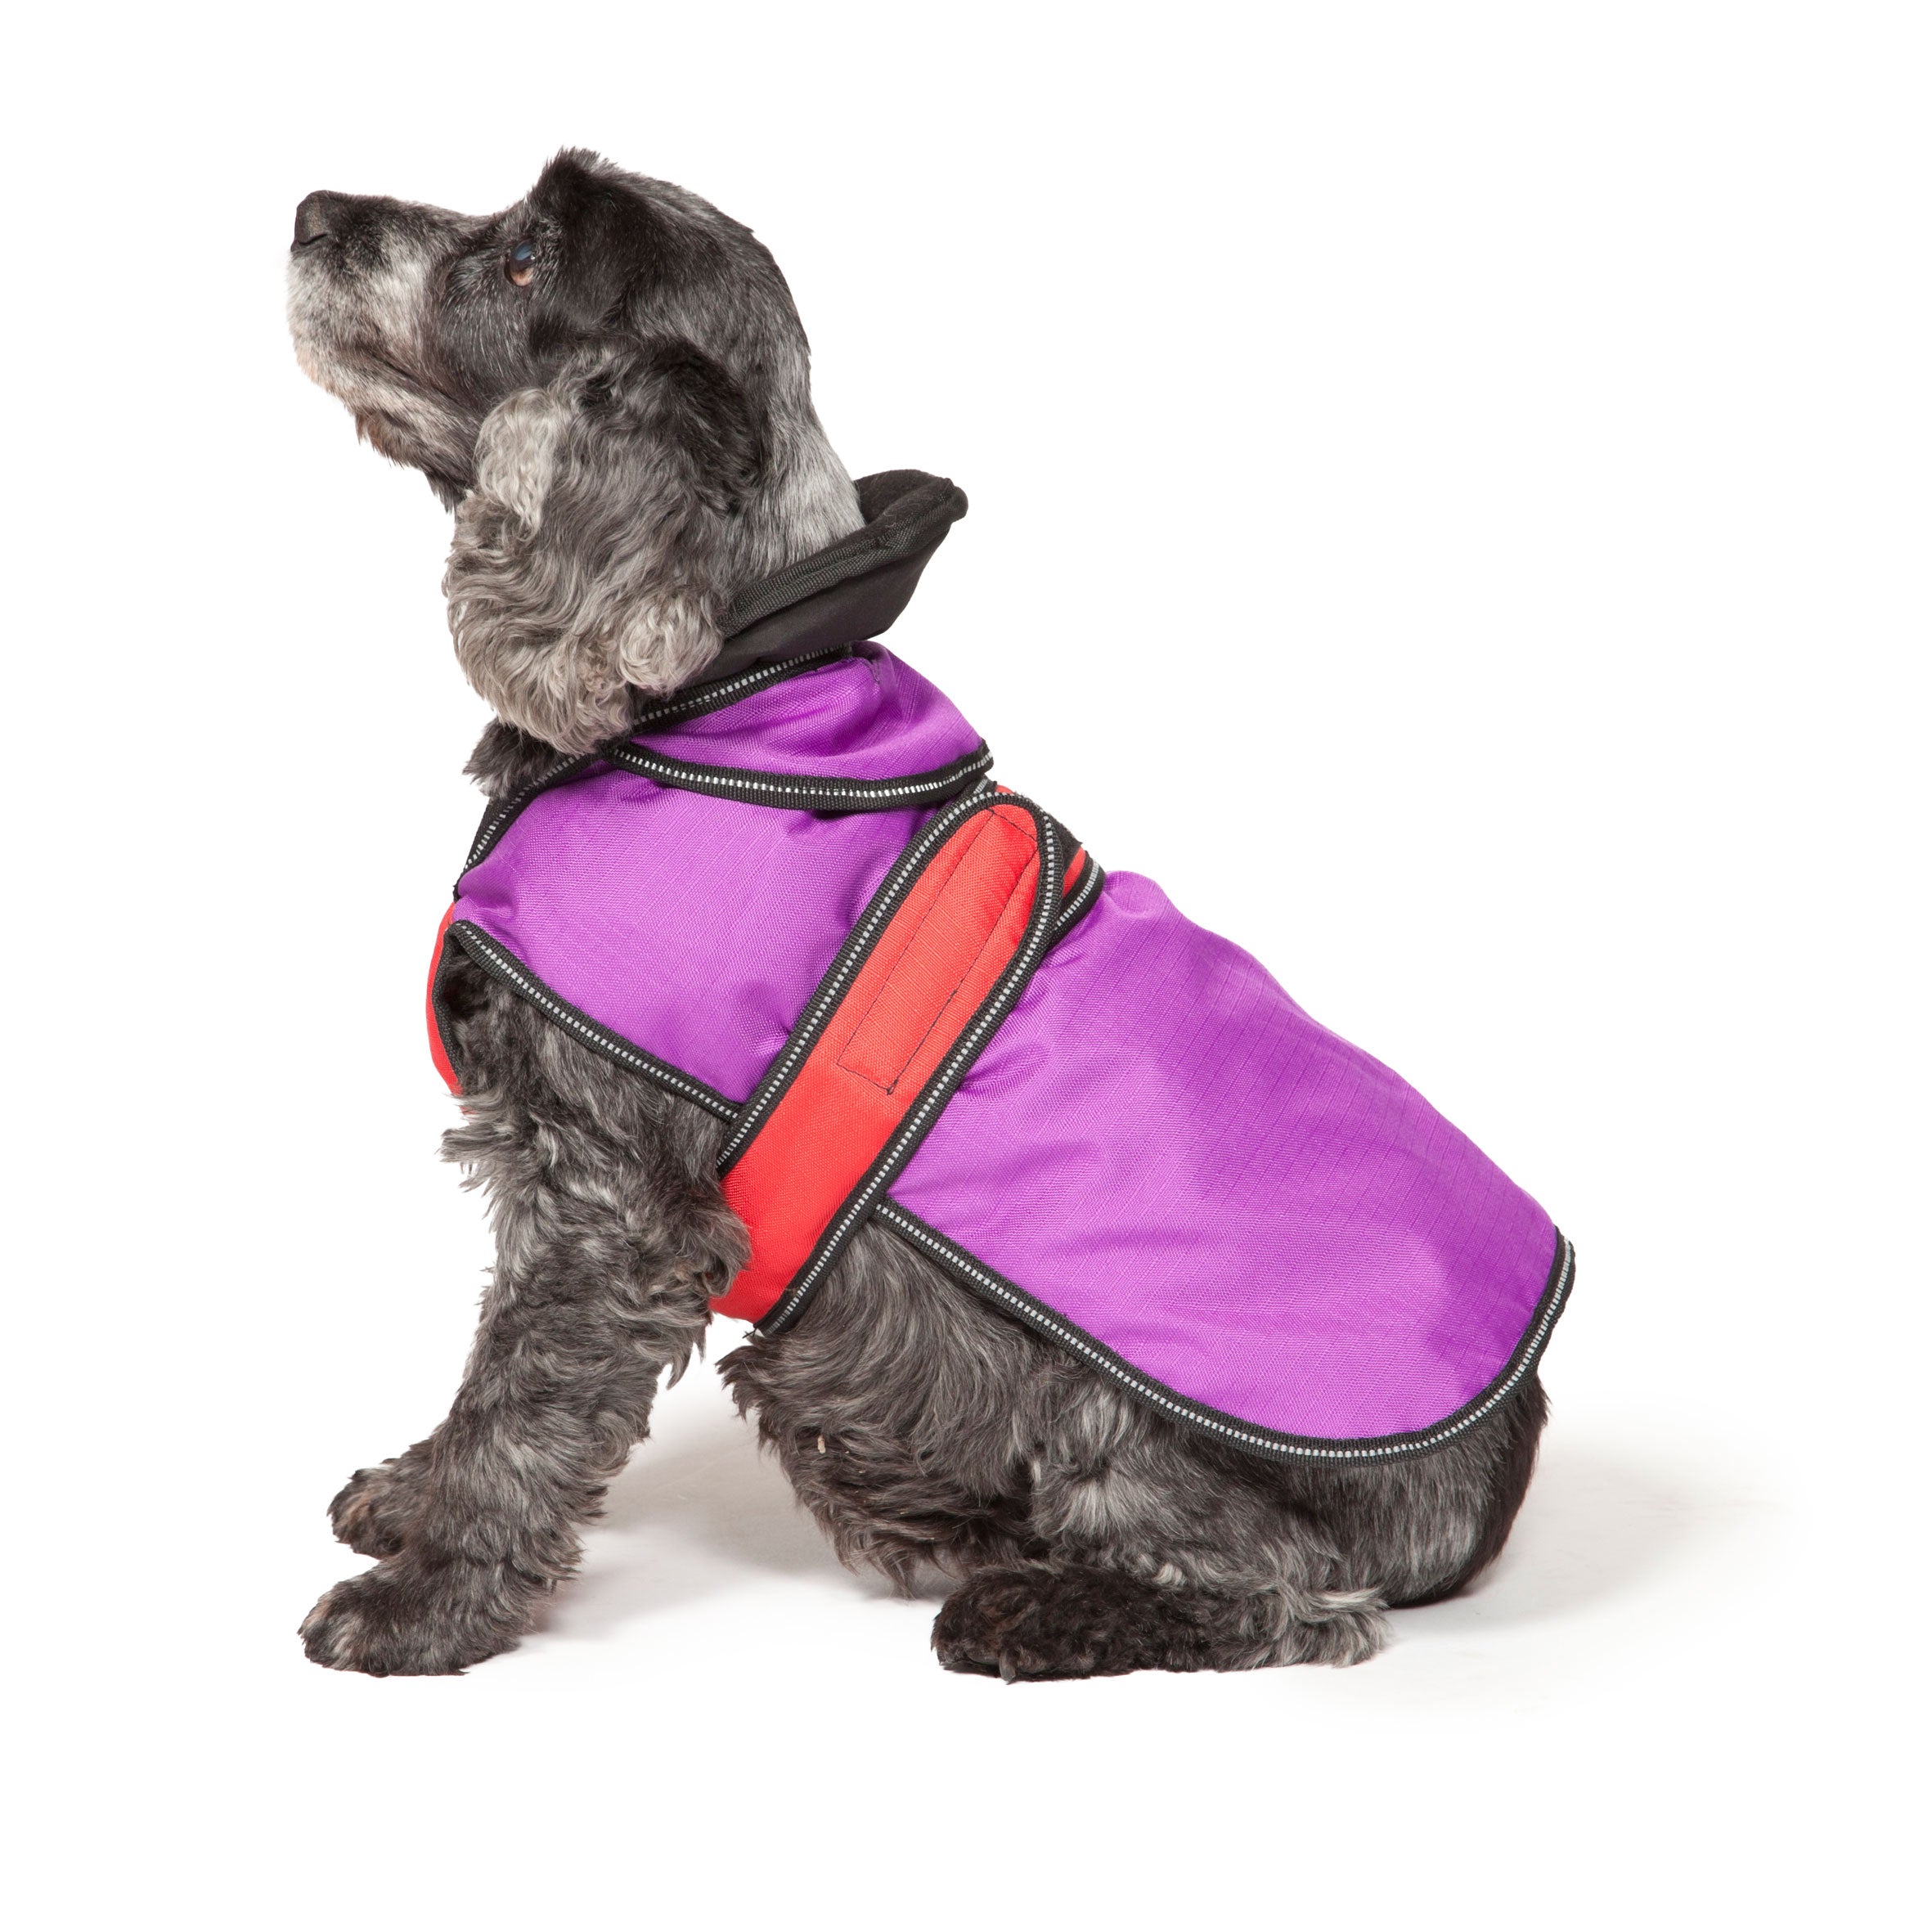 The Ultimate 2 in 1 Waterproof Dog Coat Purple And Red by Danish Design